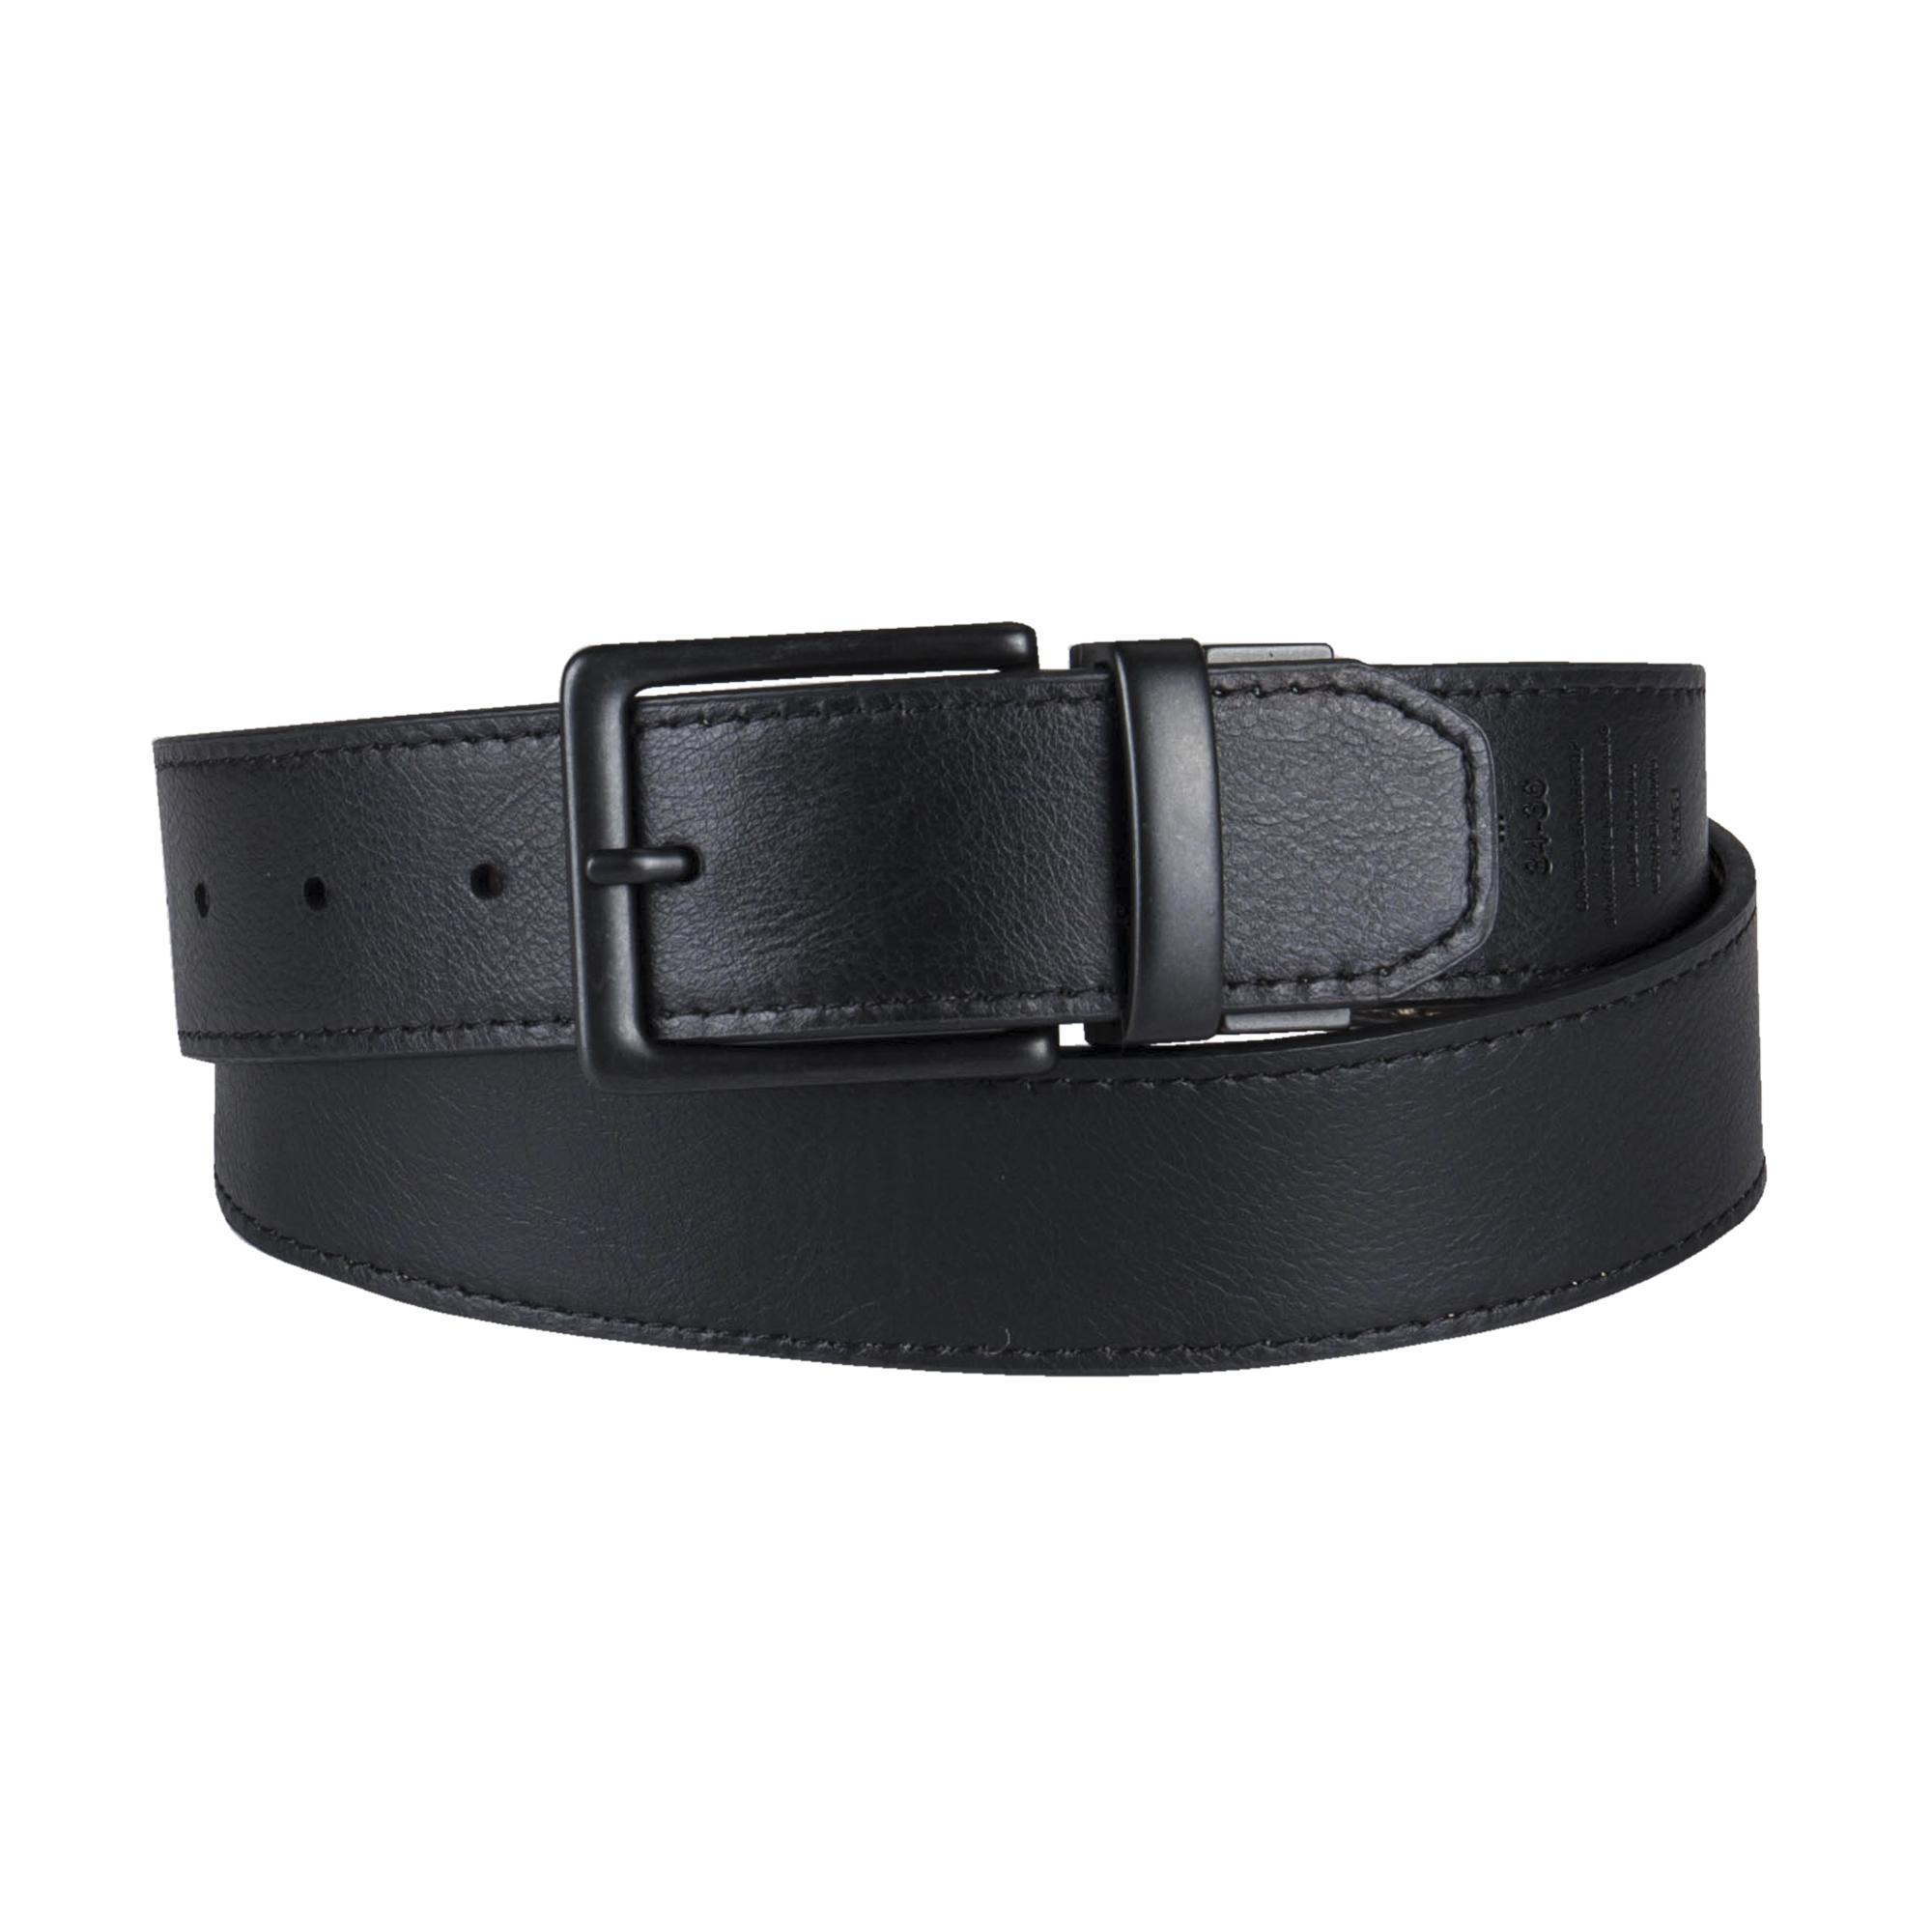 Levi's Men's Two-in-One Reversible Casual Jean Belt - image 2 of 7